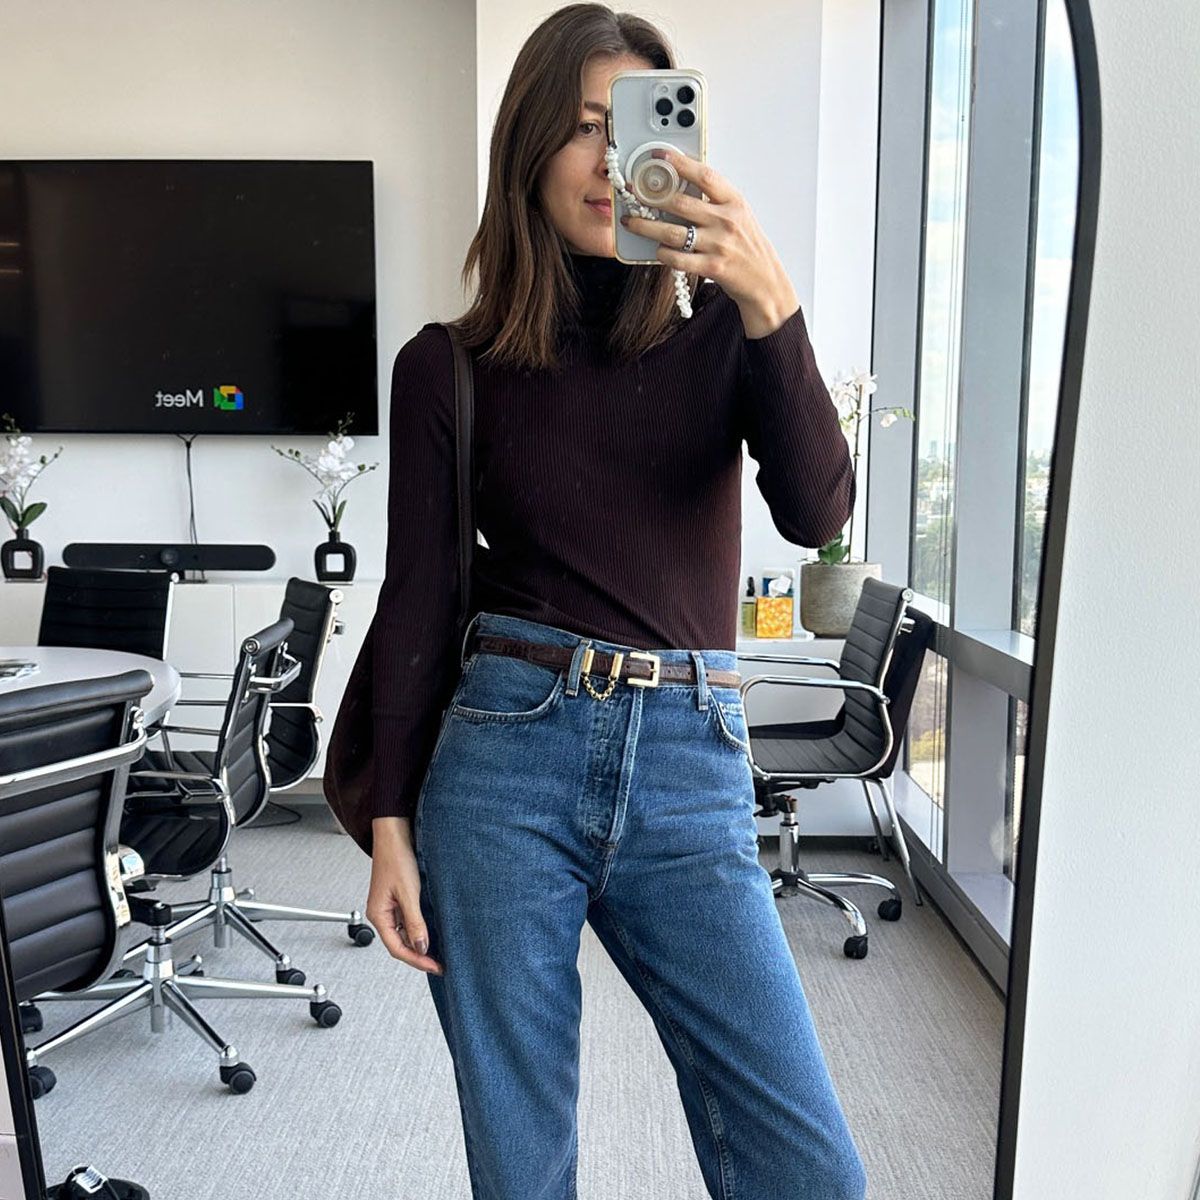 How to Style Straight Leg Jeans - Wishes & Reality